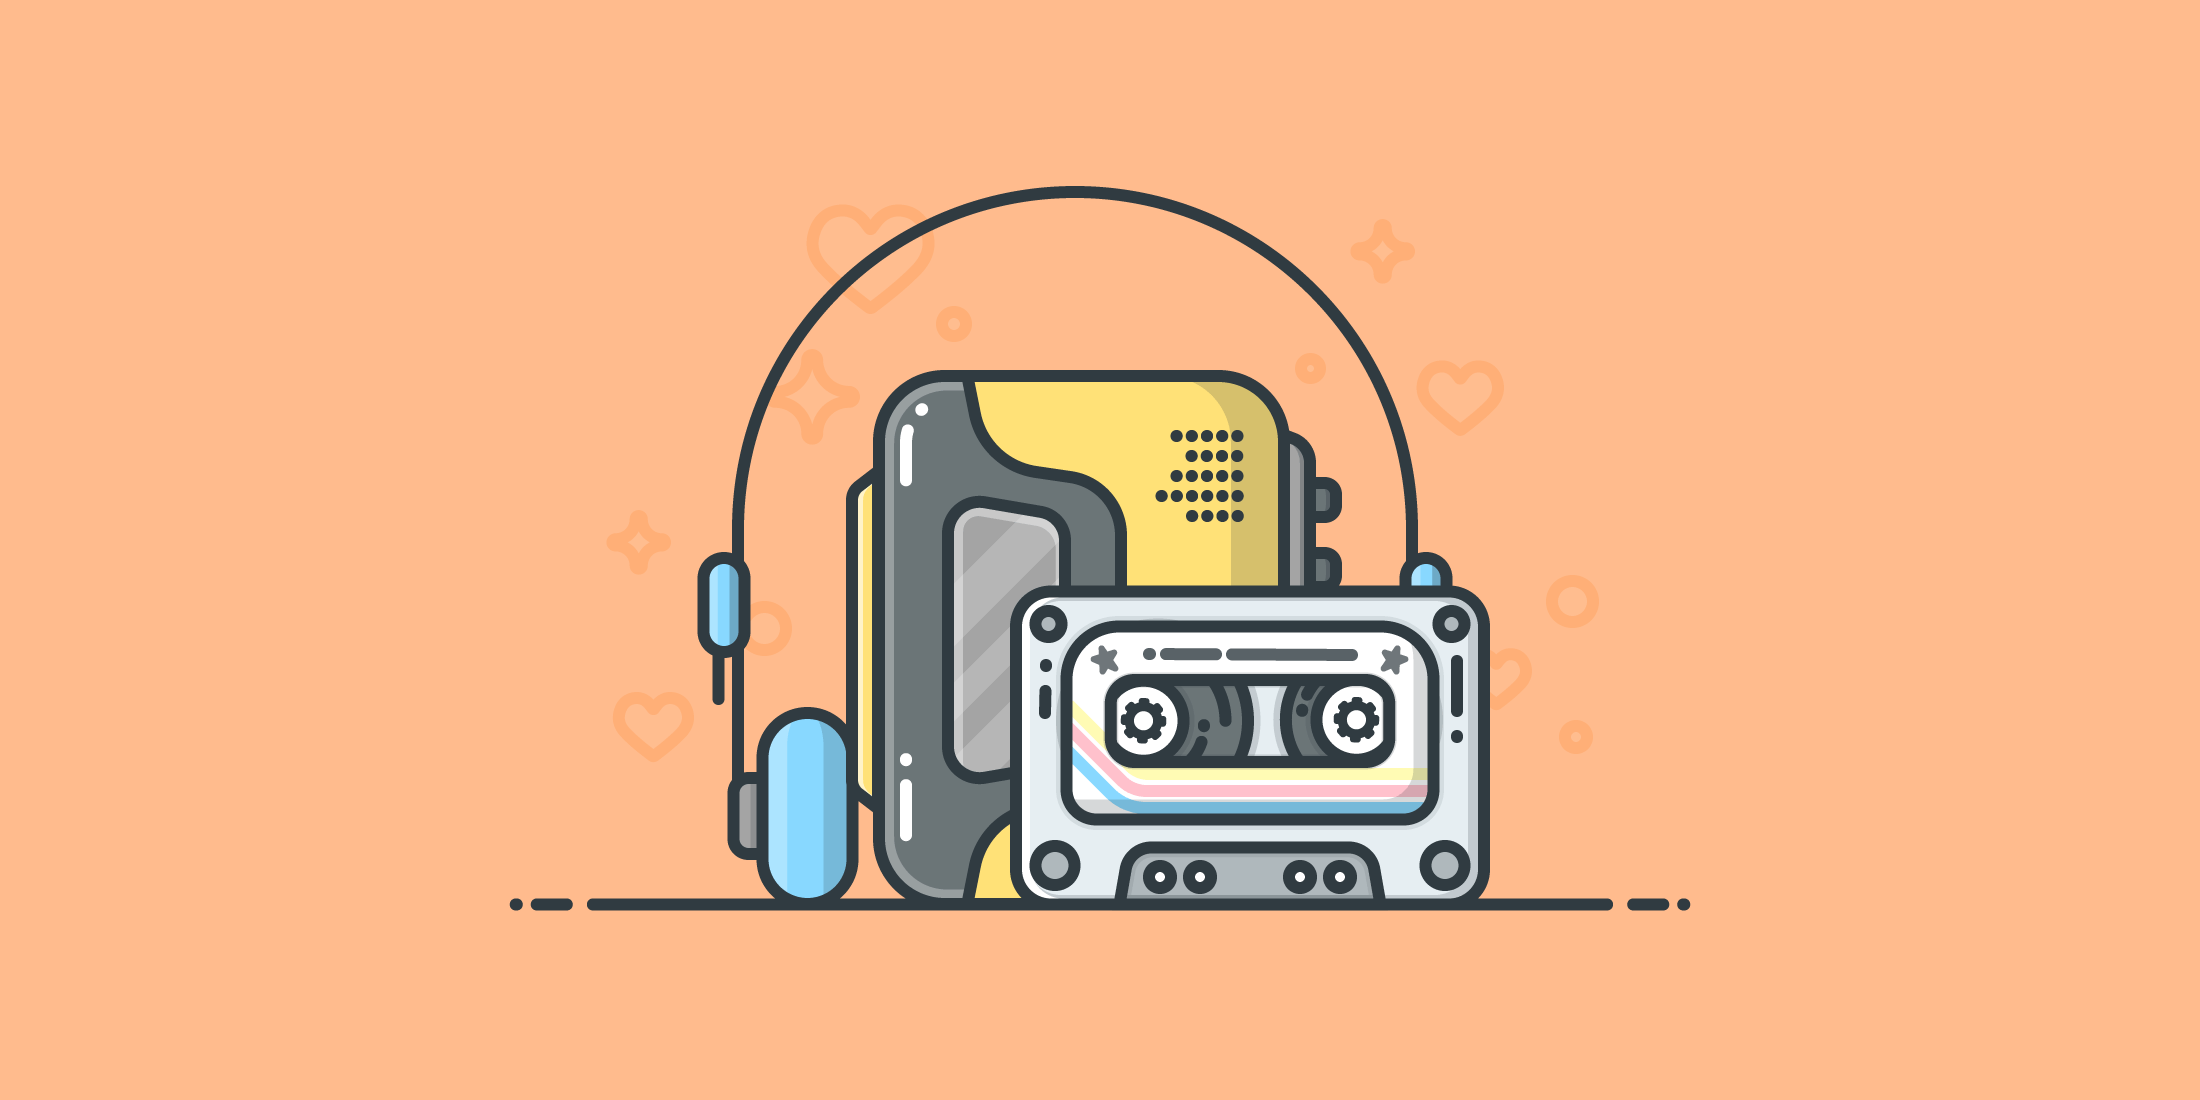 Illustration of a 1980's portable tape player